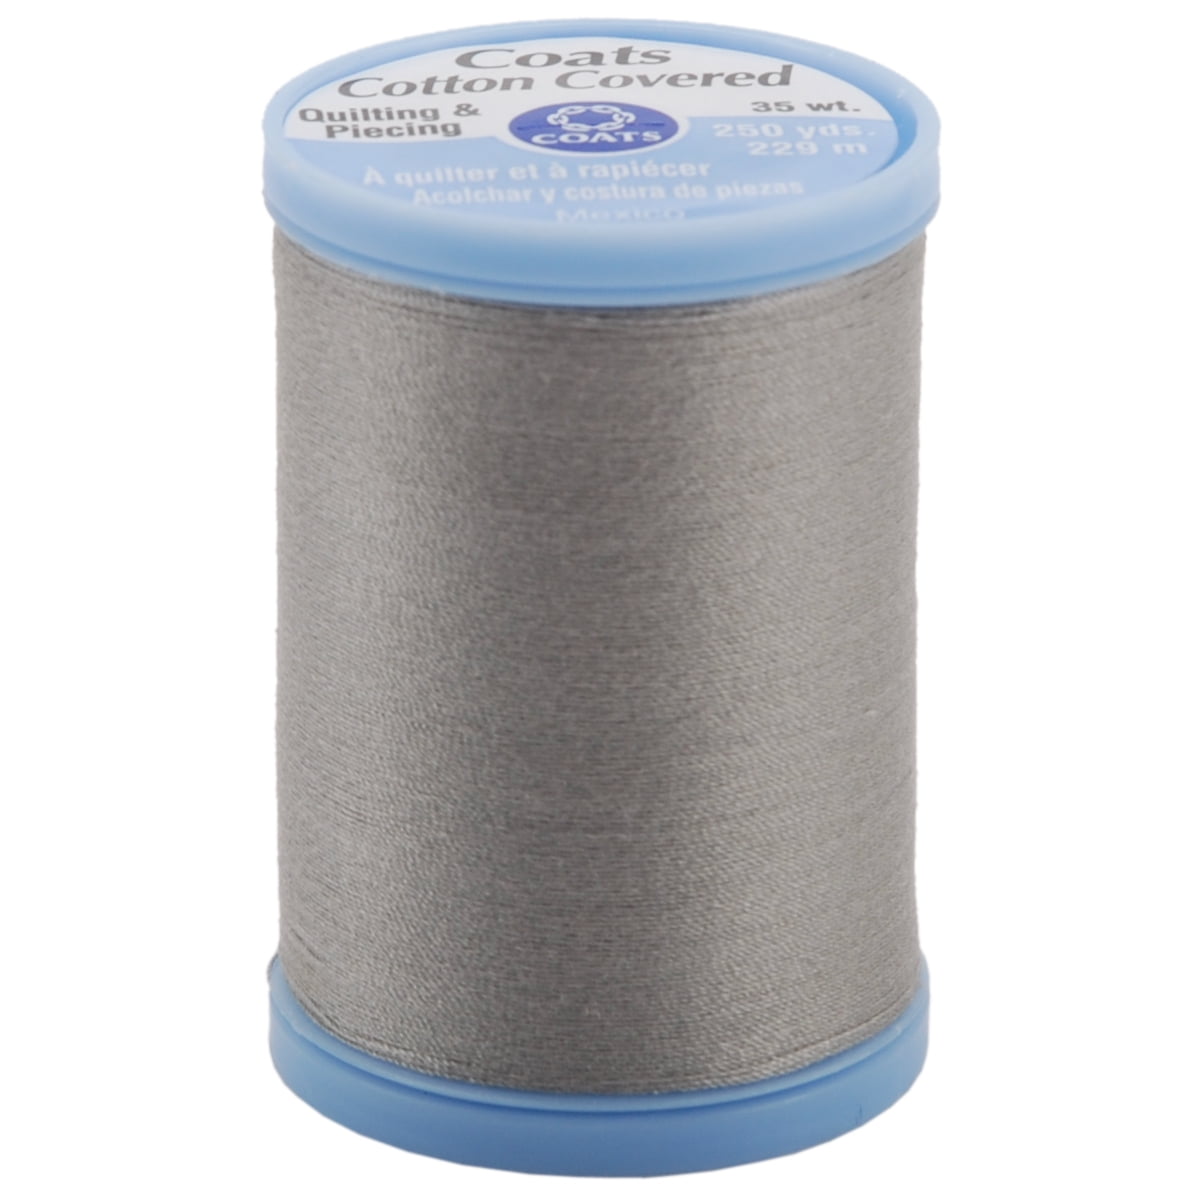 Cotton Covered Quilting & Piecing Thread 250yd-Nugrey 